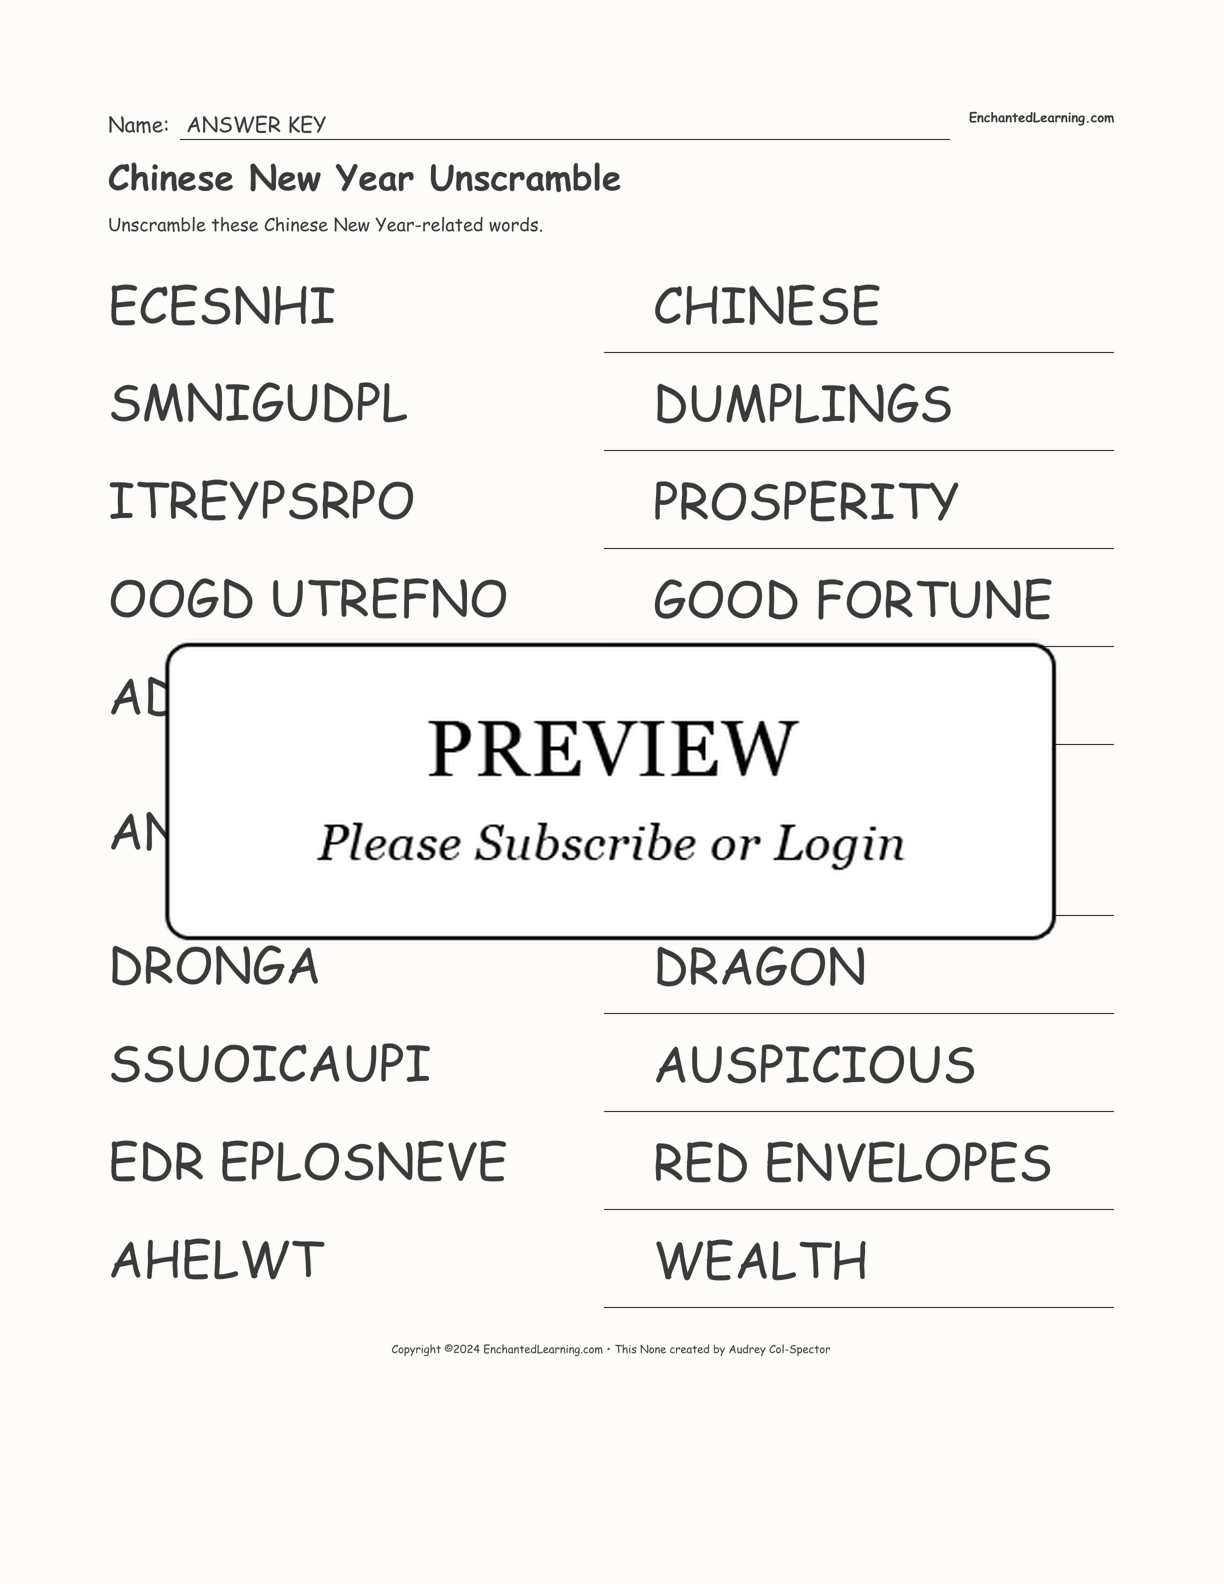 Chinese New Year Unscramble interactive worksheet page 2